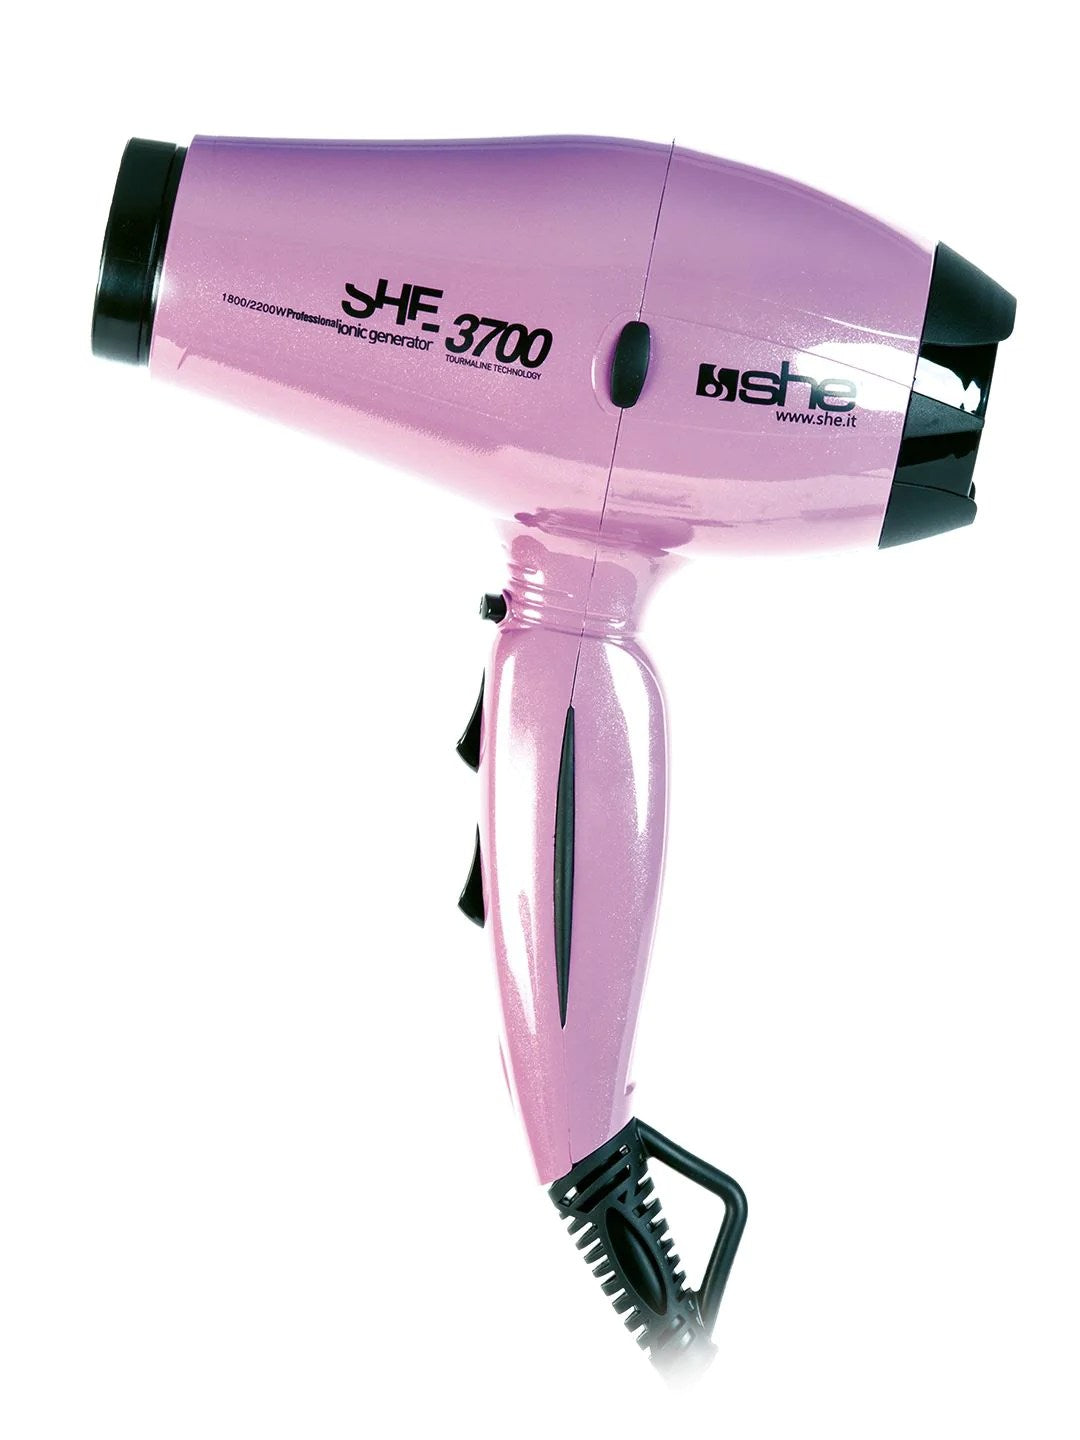 

She is a professional compact hairdryer, model 3700, with ionic technology and 2200W power, in a lilac color.